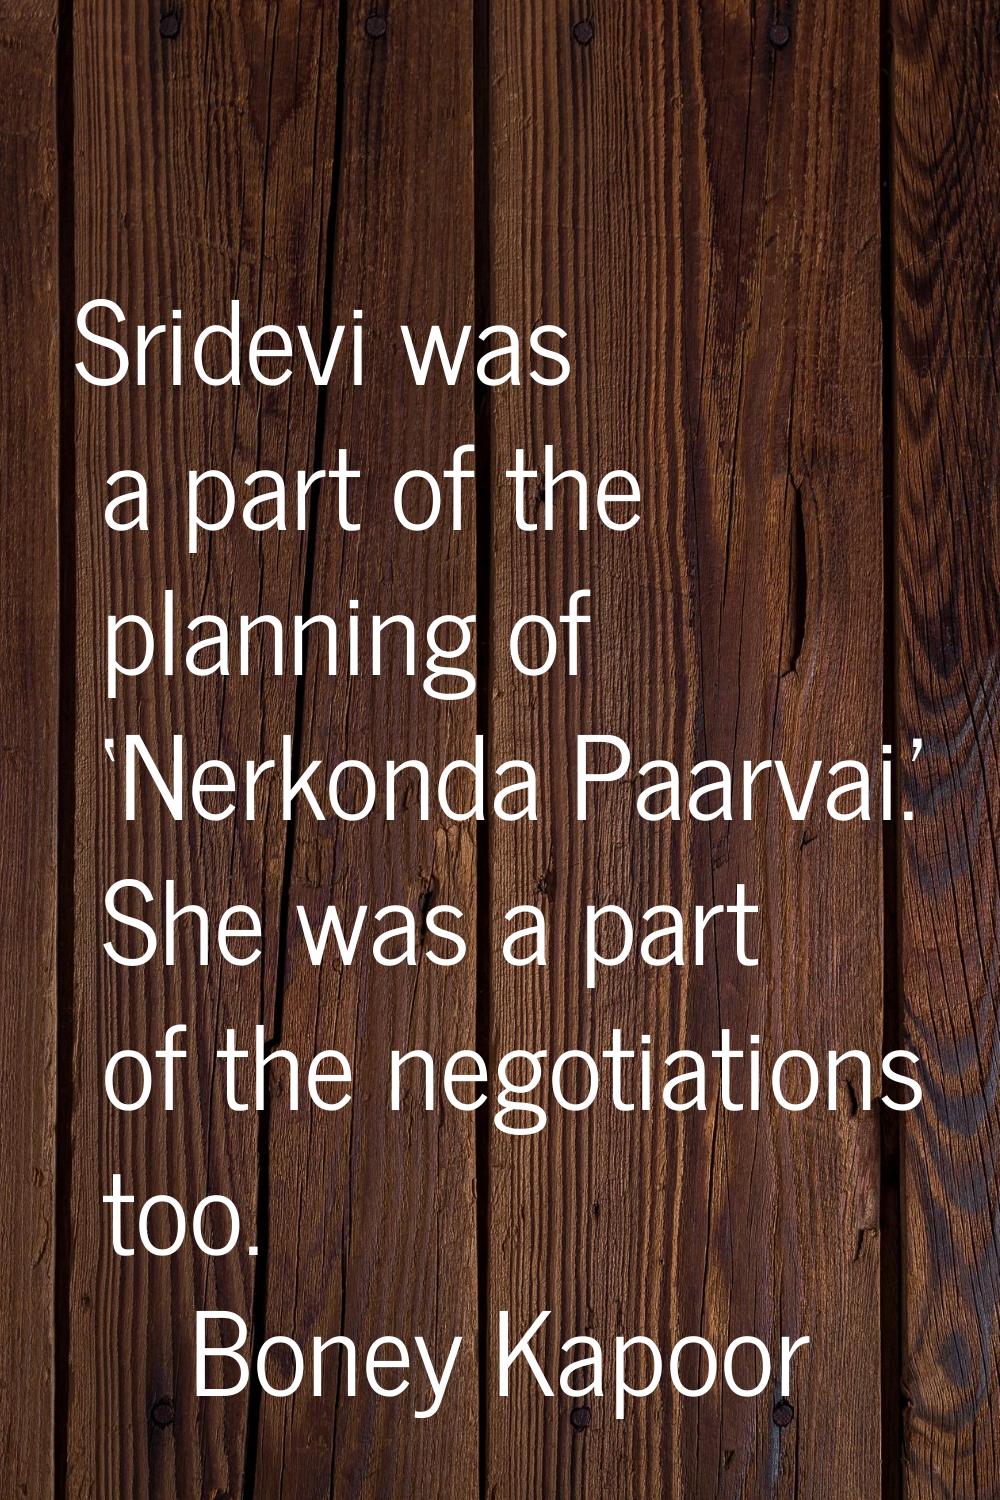 Sridevi was a part of the planning of ‘Nerkonda Paarvai.' She was a part of the negotiations too.